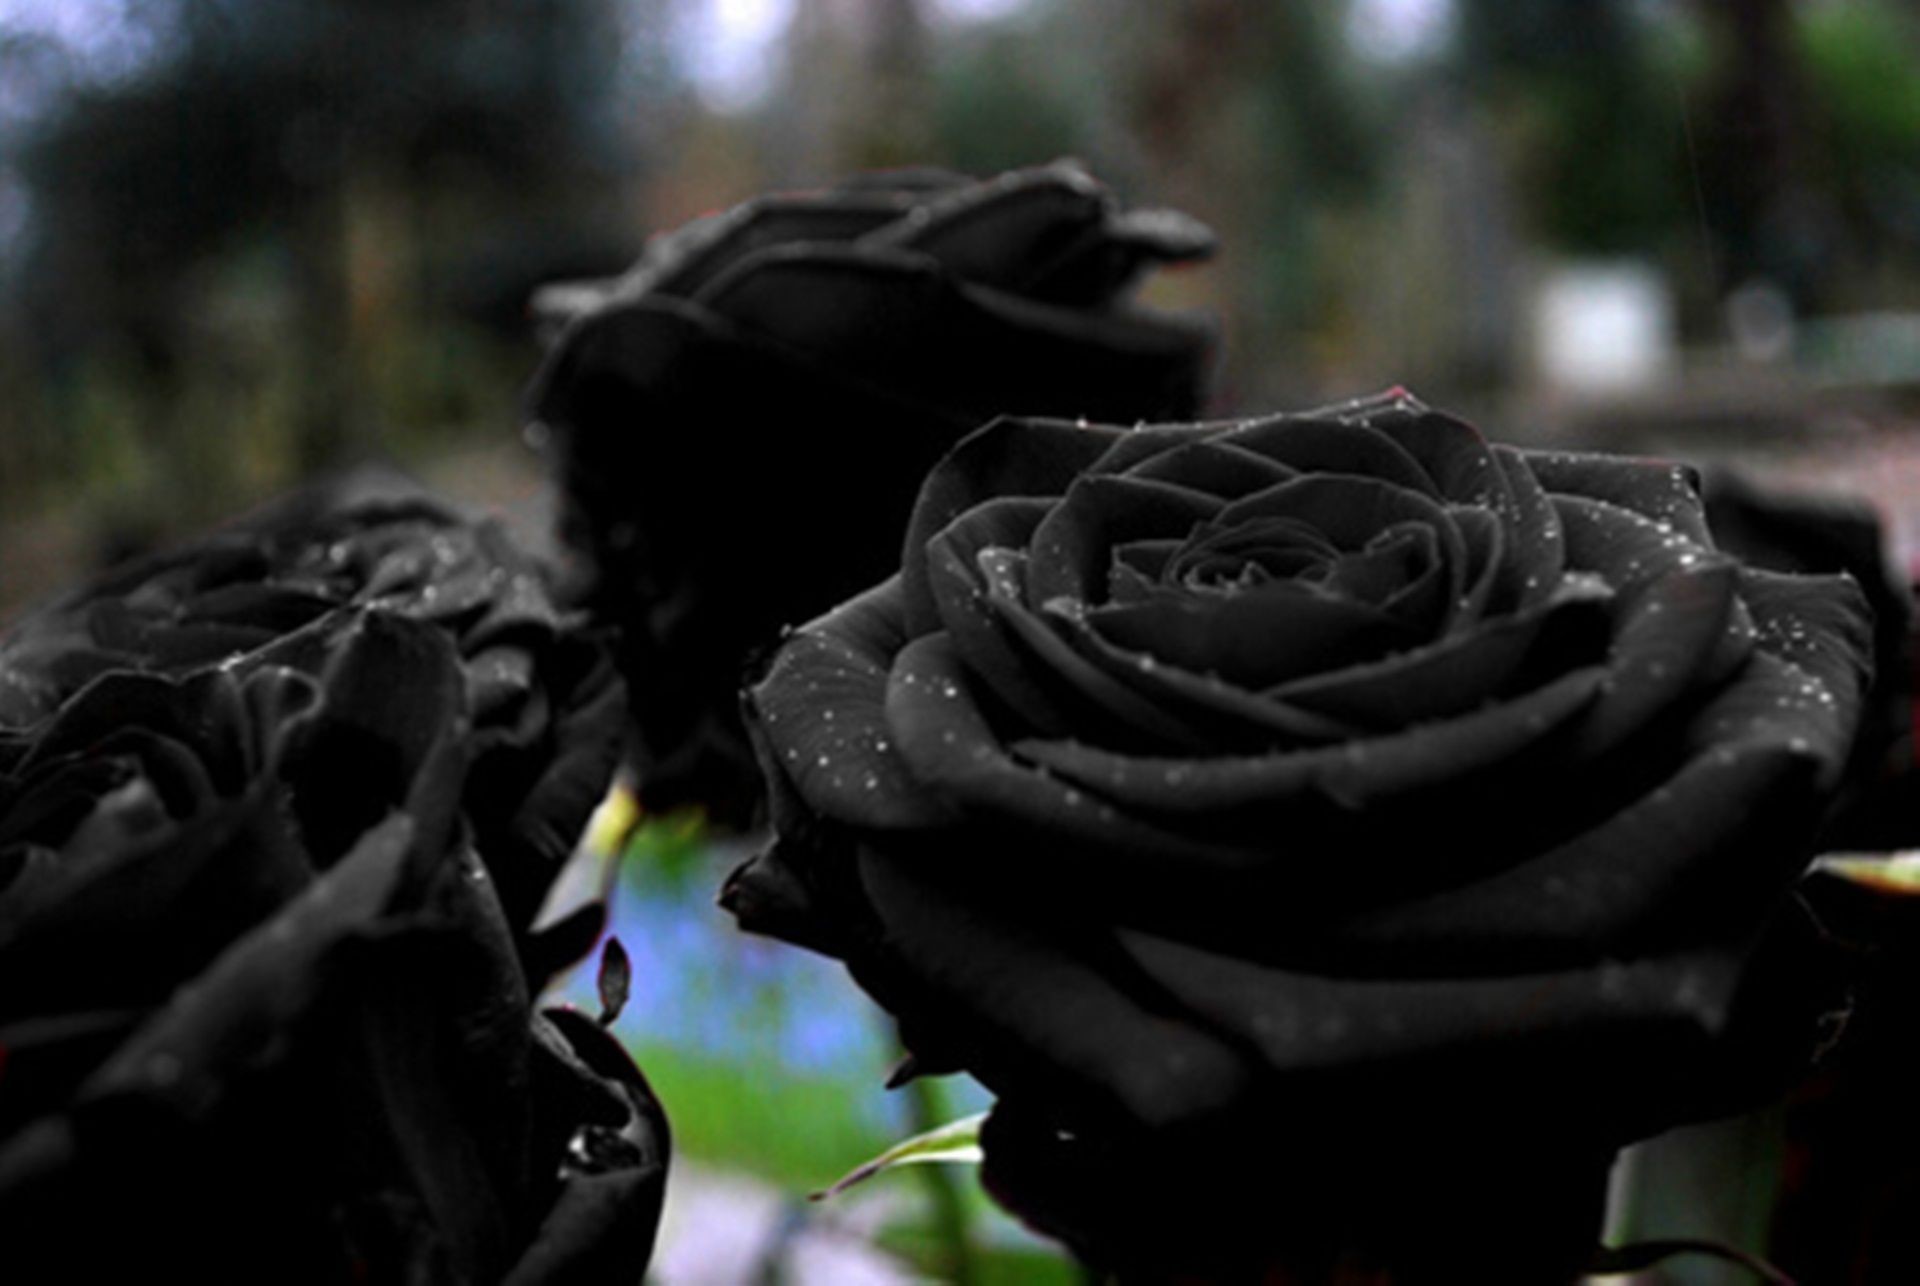 Black Rose Backgrounds (50+ pictures)